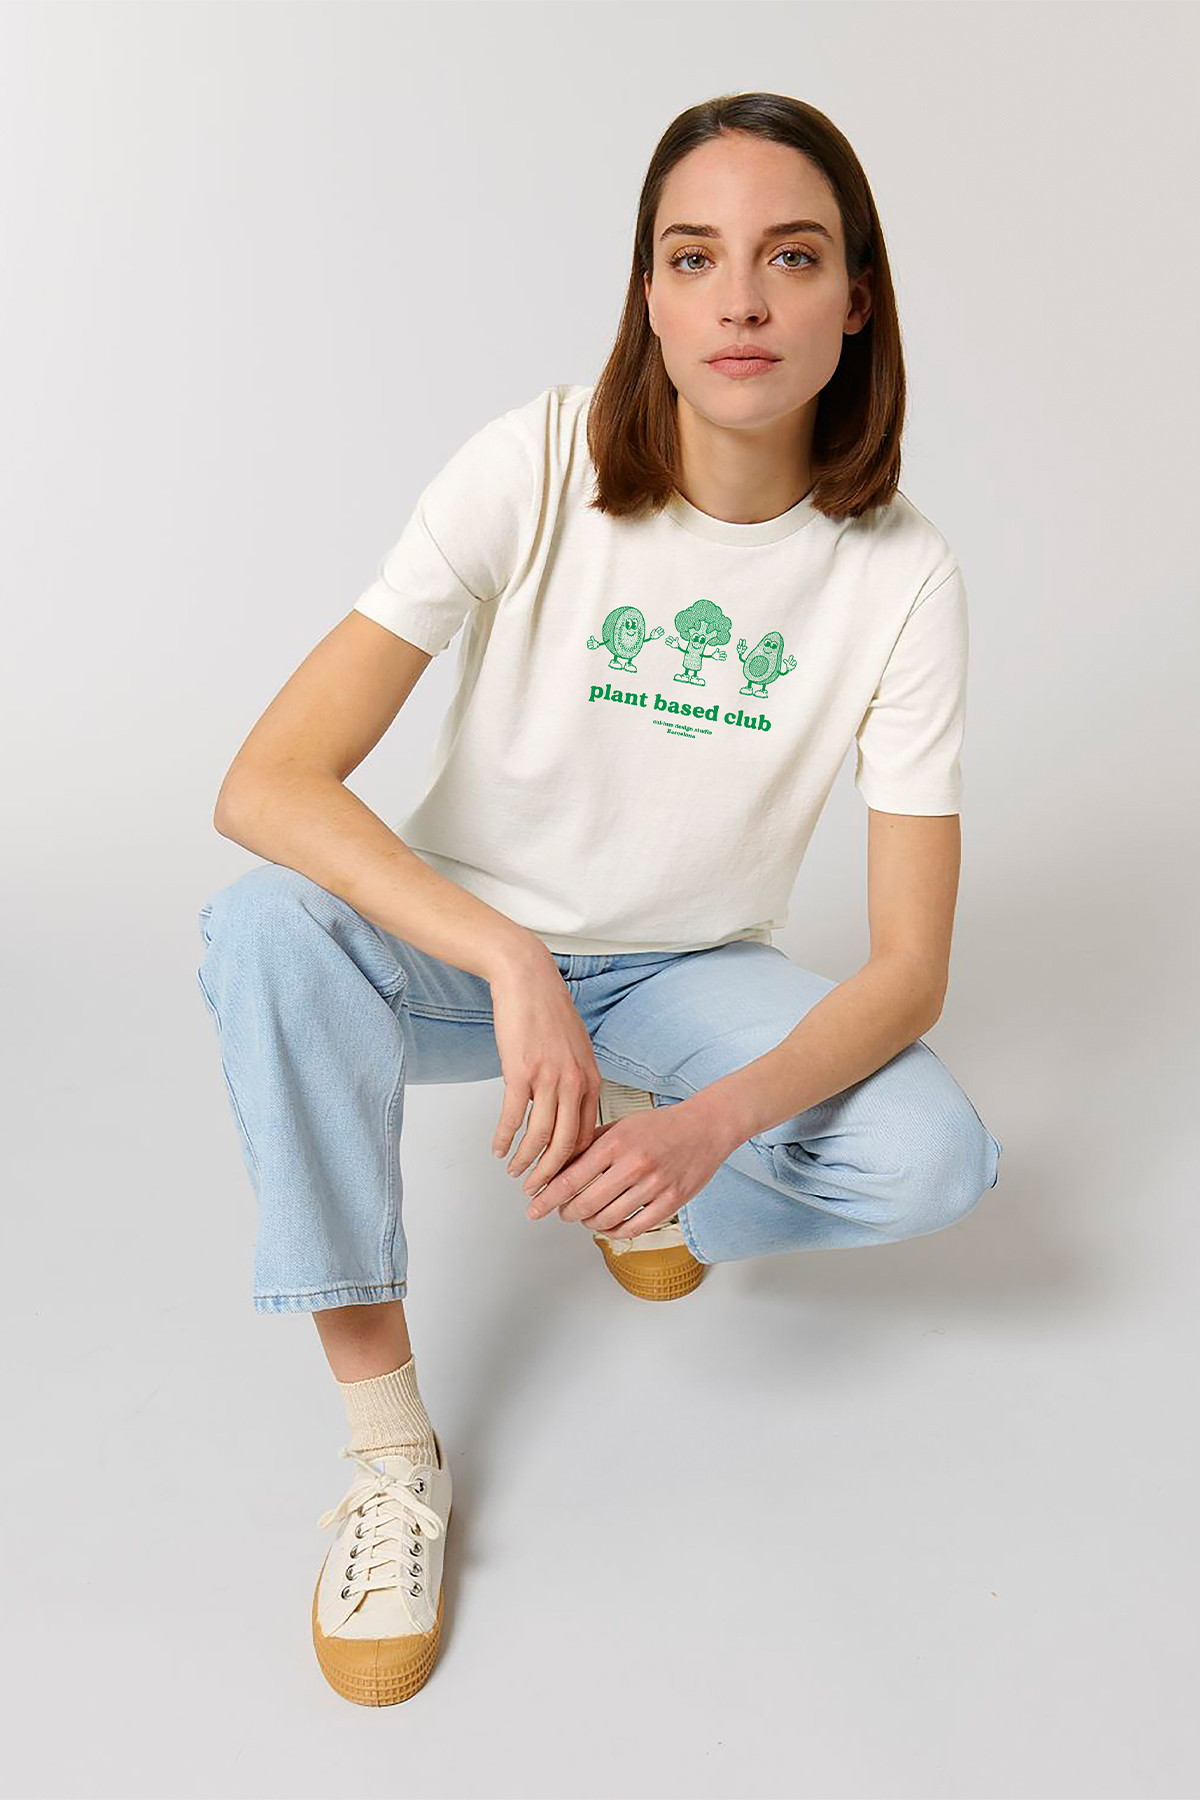 Model wearing a white tshirt with a vegetables print